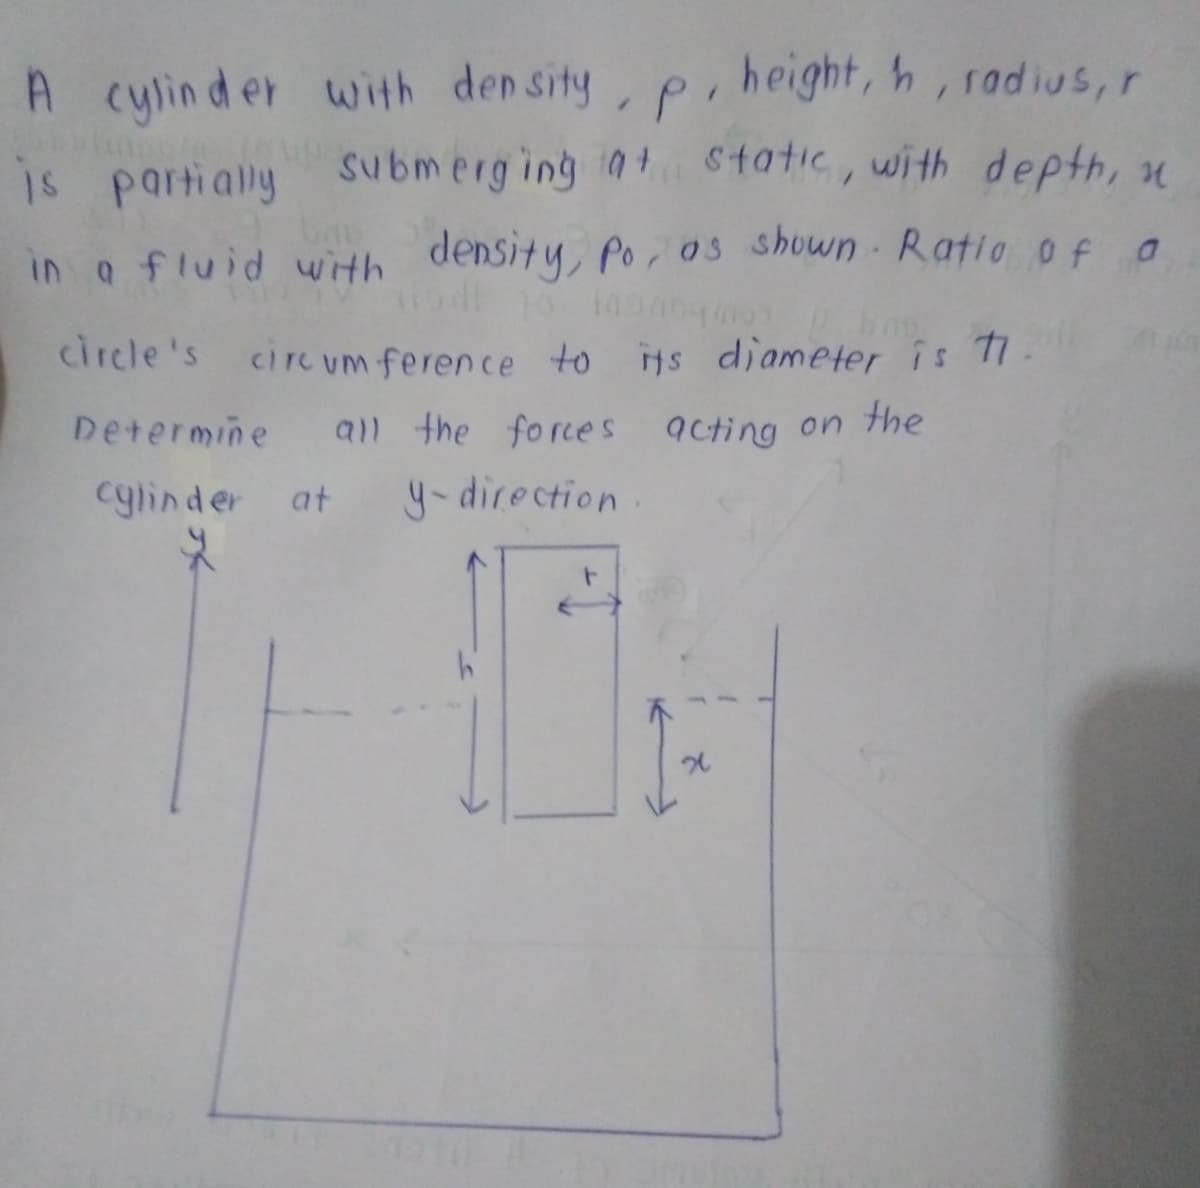 A cylind er with density, p. height, h, radius, r
is partially submerging at 6tatic, with depth, u
in a fluid with density, Po, os shown Ratio o f a
Circ Um ference to its diameter is T1.
Determine
all the forces acting on the
cglinder at
y-direction
